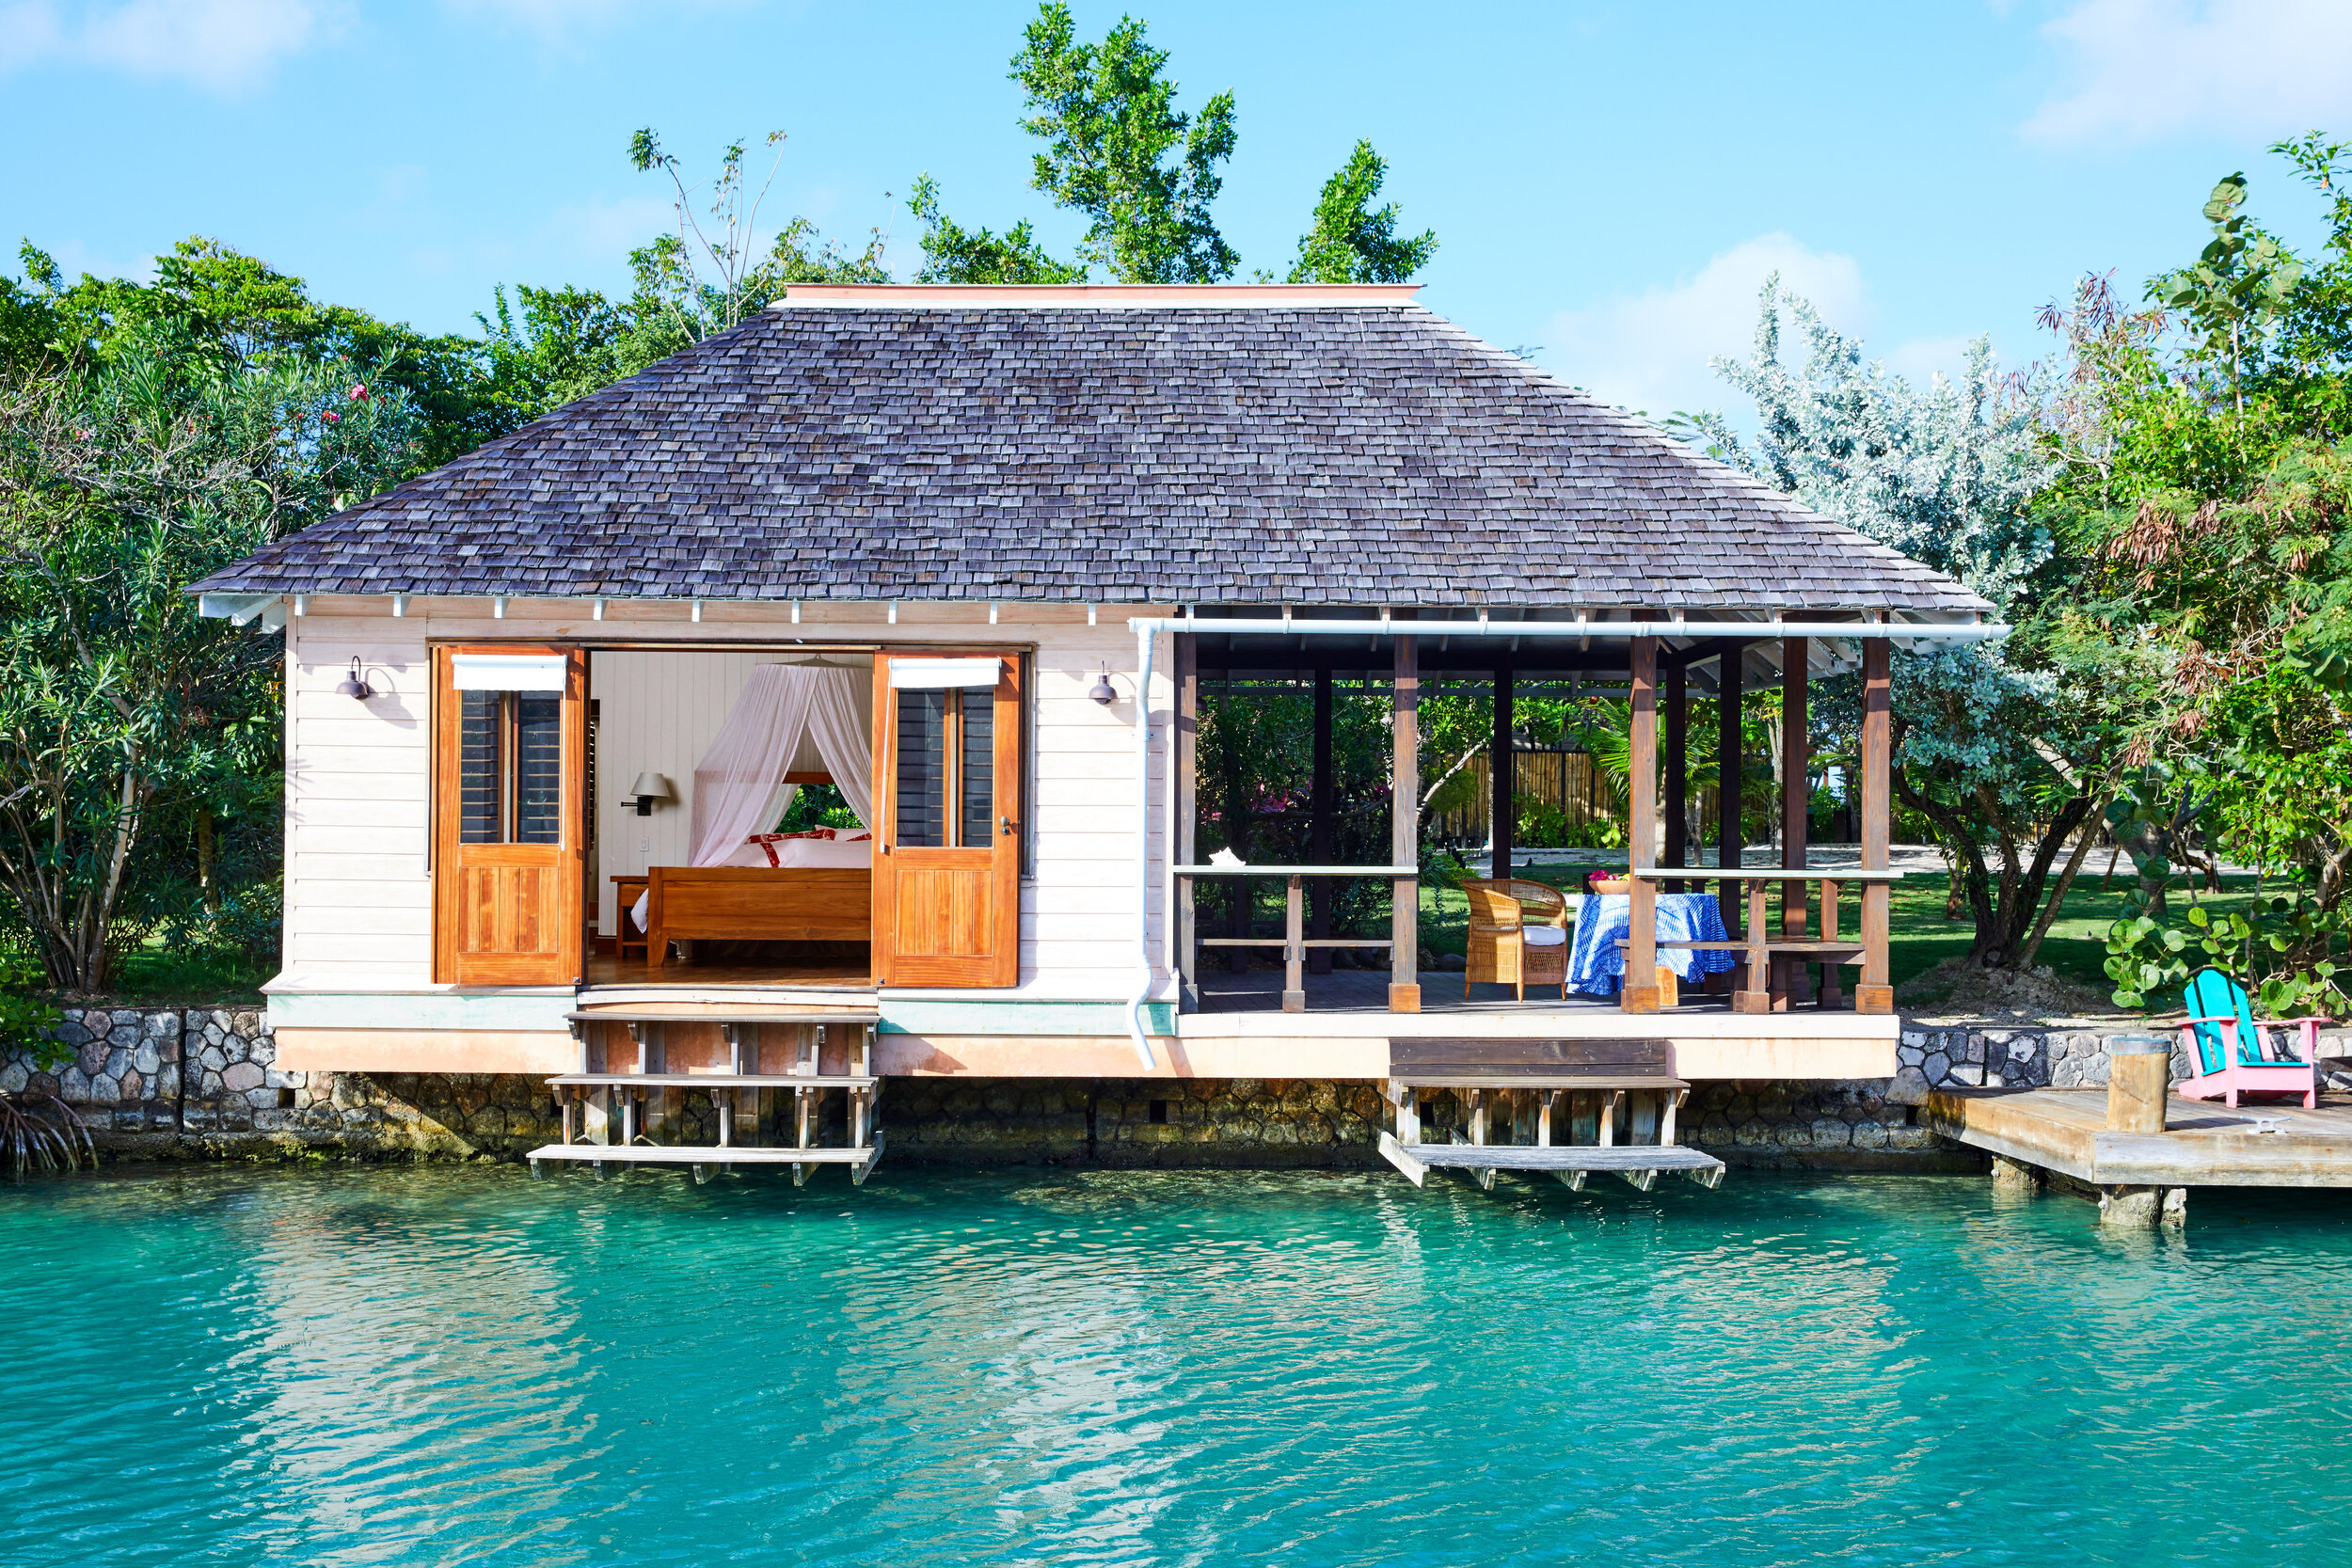   A Lagoon Cottage at GoldenEye (photo credit: Dominique DeBay Collection)  